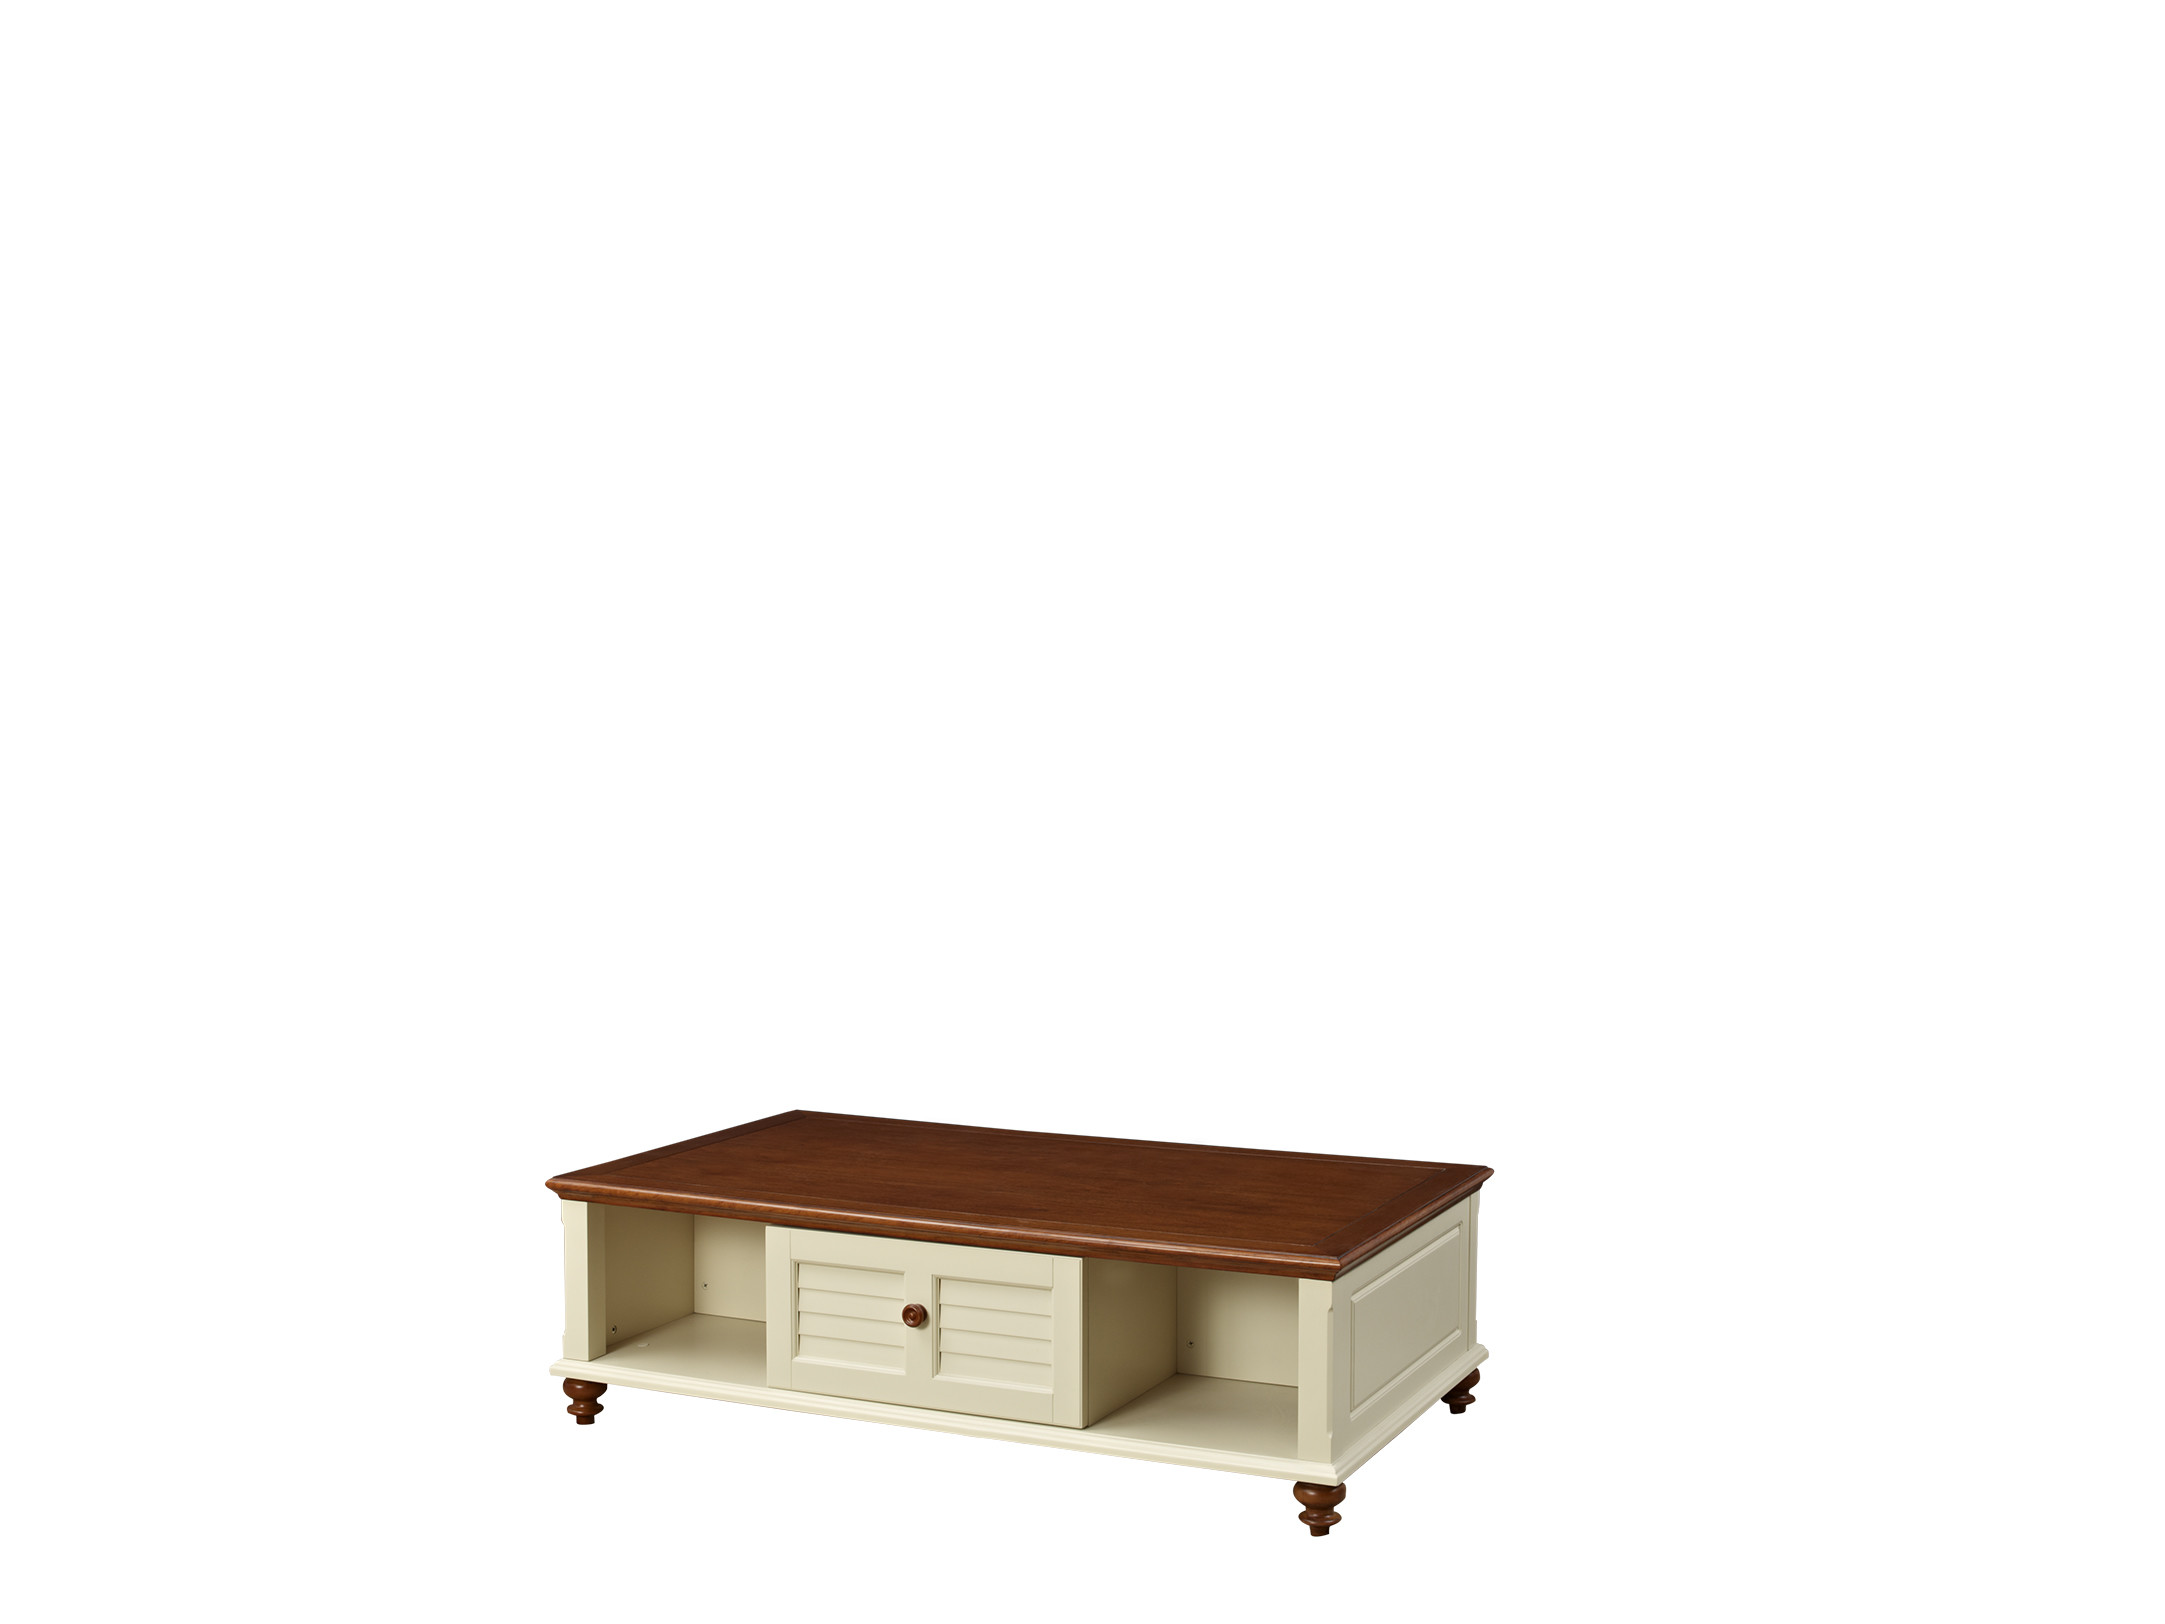 Cheap Mediterranean Style Furniture Coffee table made by rubber wood and white painting storage drawers for sale